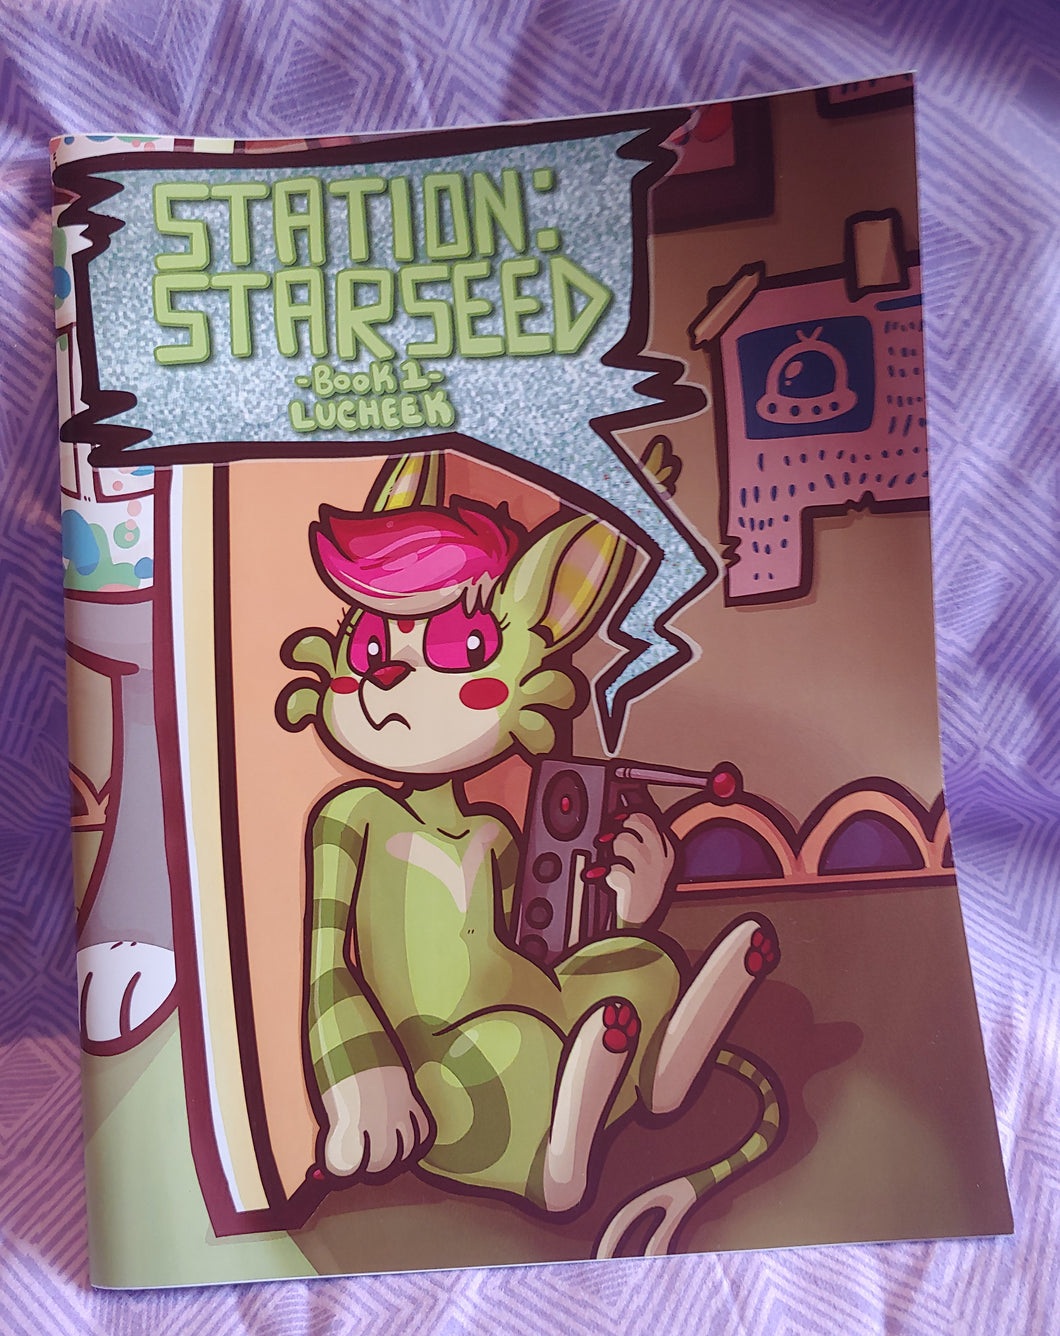 Station: Starseed Issue 1